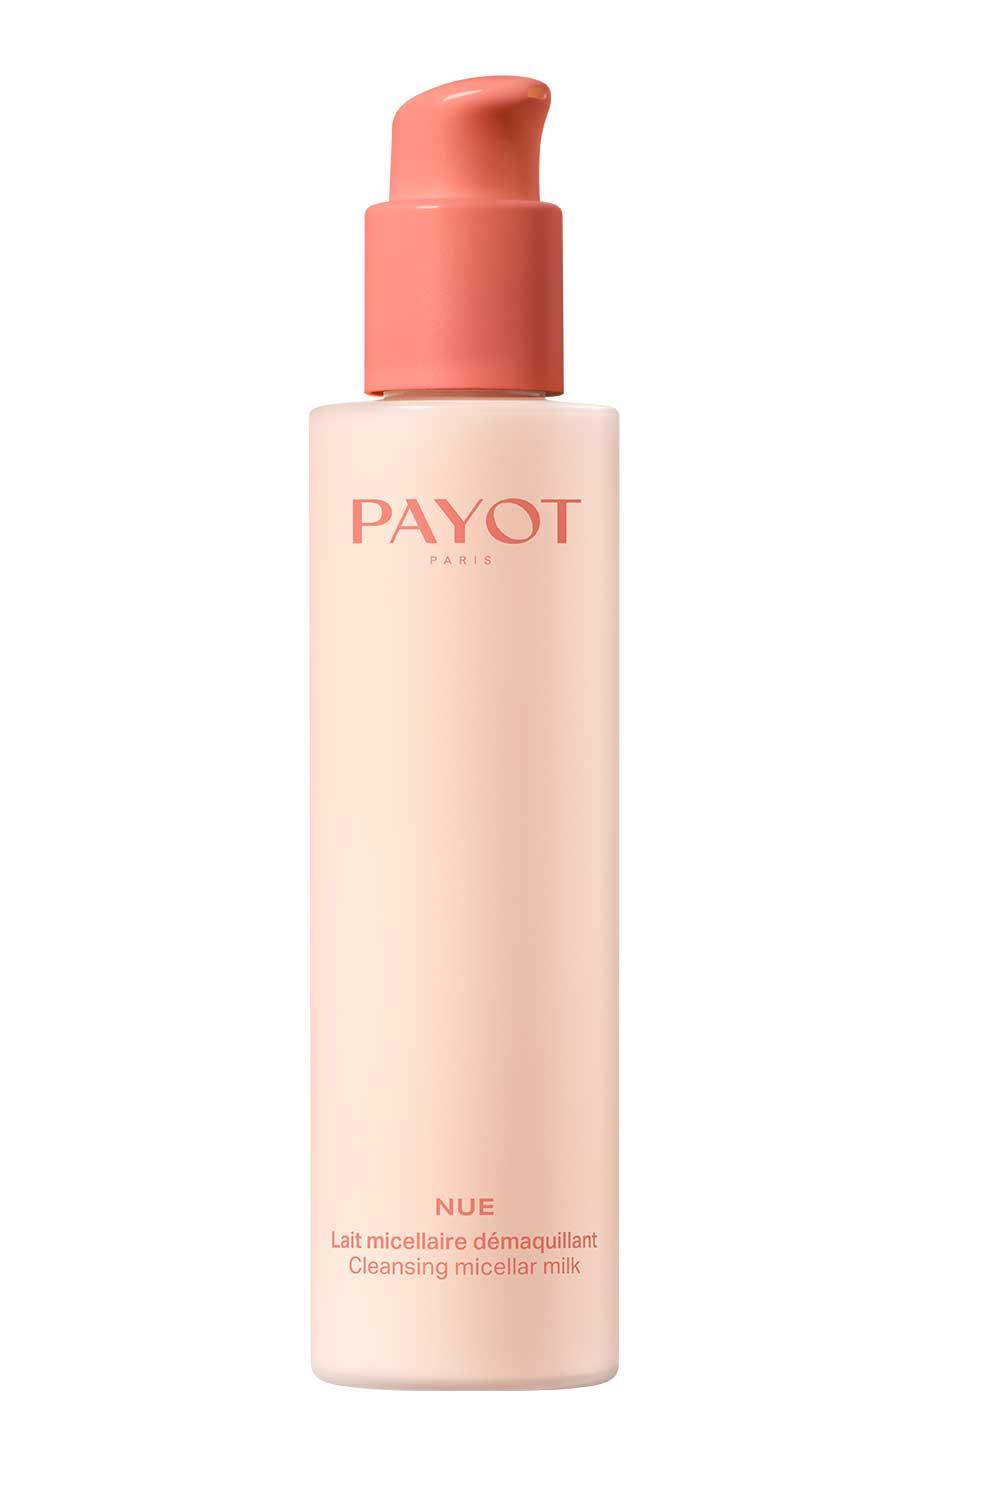 Ppayot. Nue Micellar Cleansing, Payot